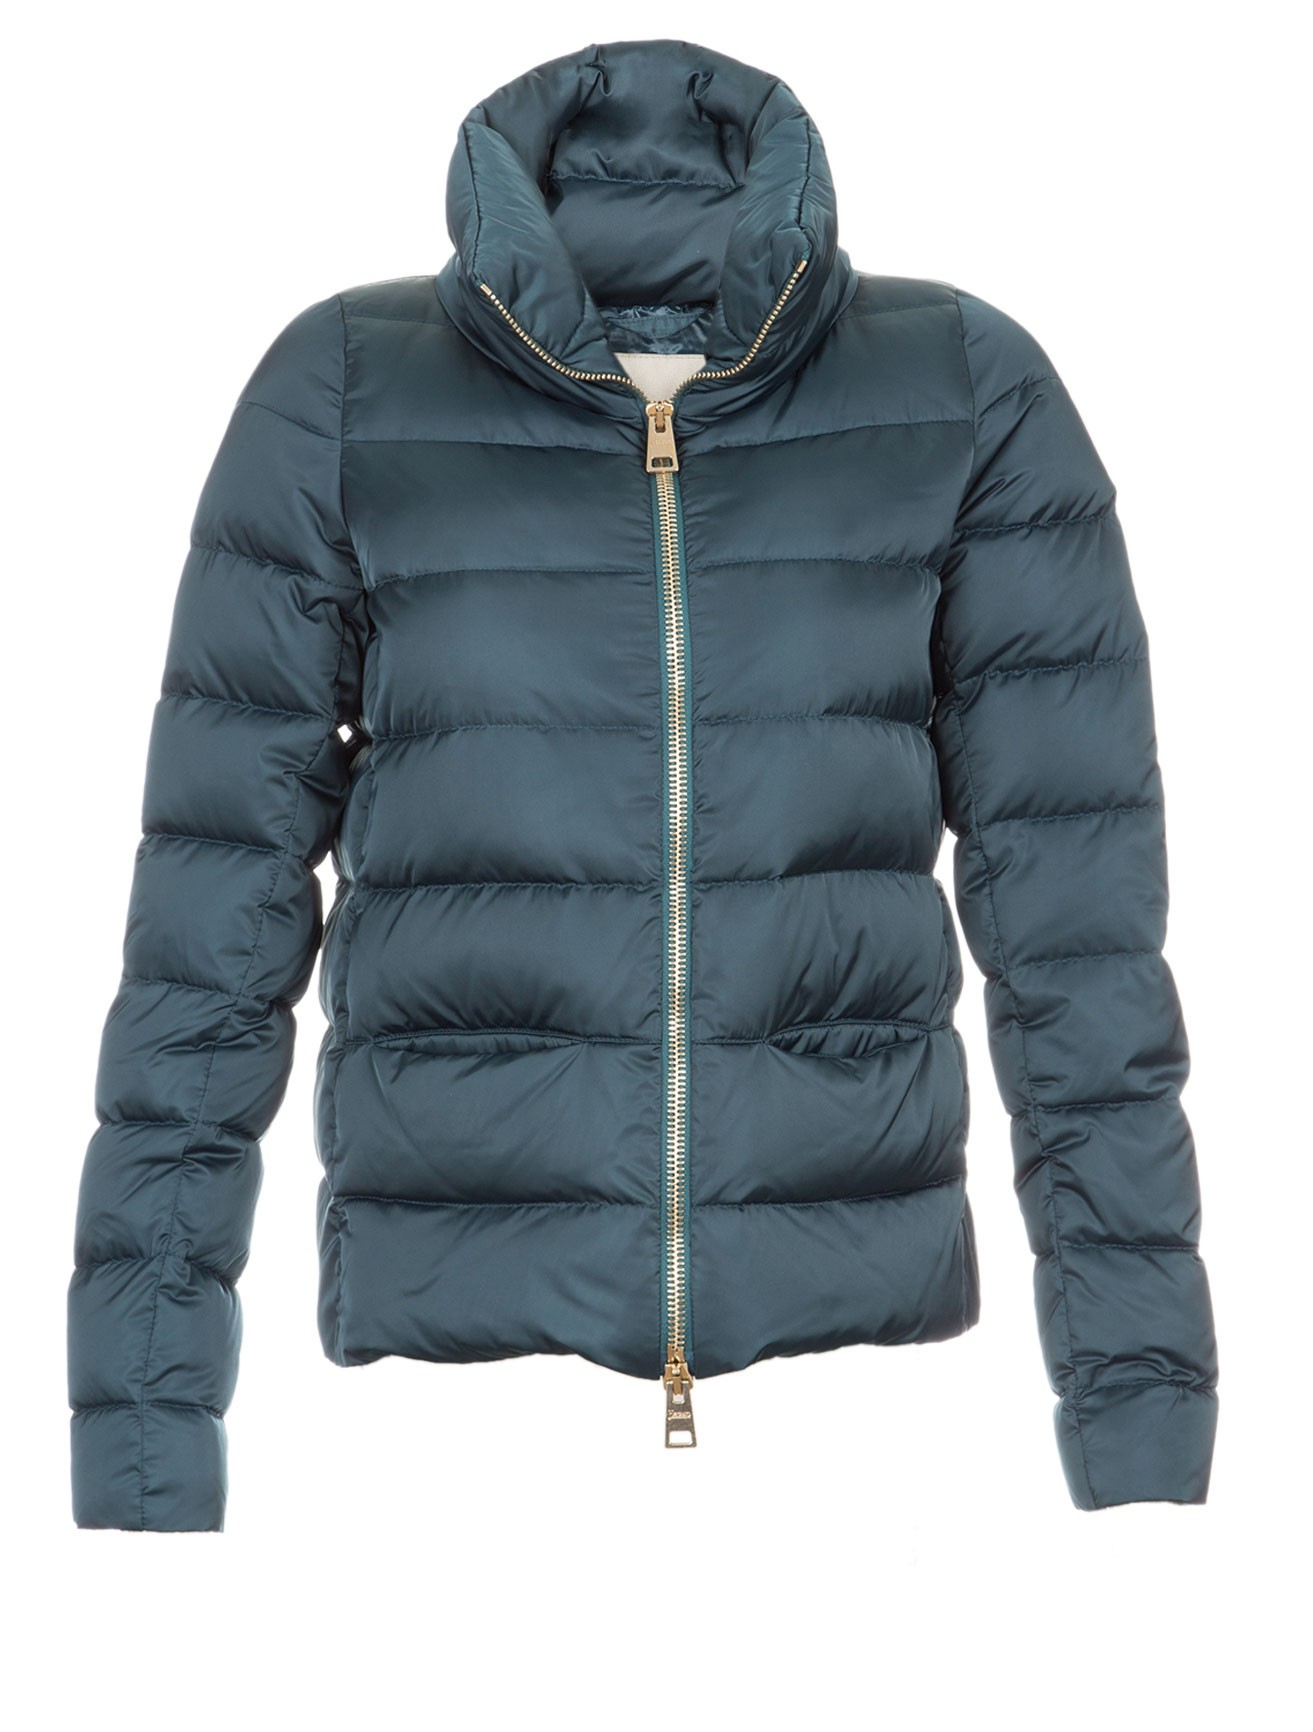 Herno Satin Puffer Jacket in Teal | Lyst